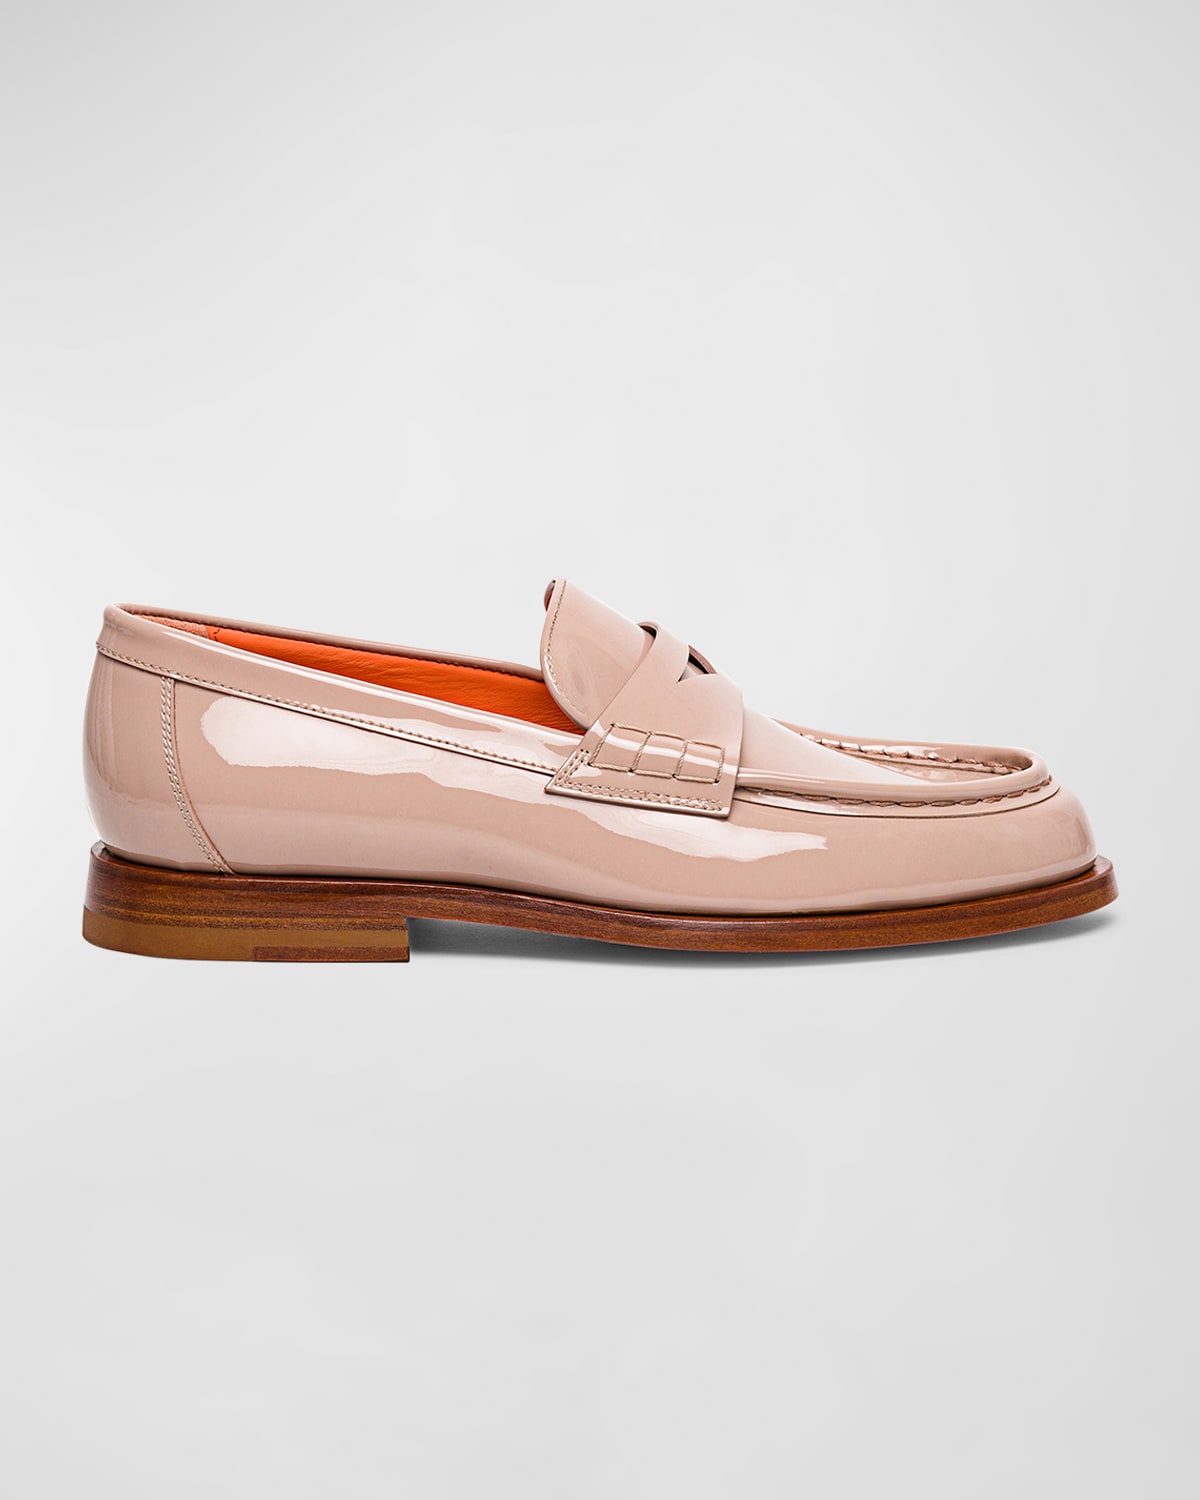 Santoni Airglow Patent Leather Penny Loafers In Light Pink